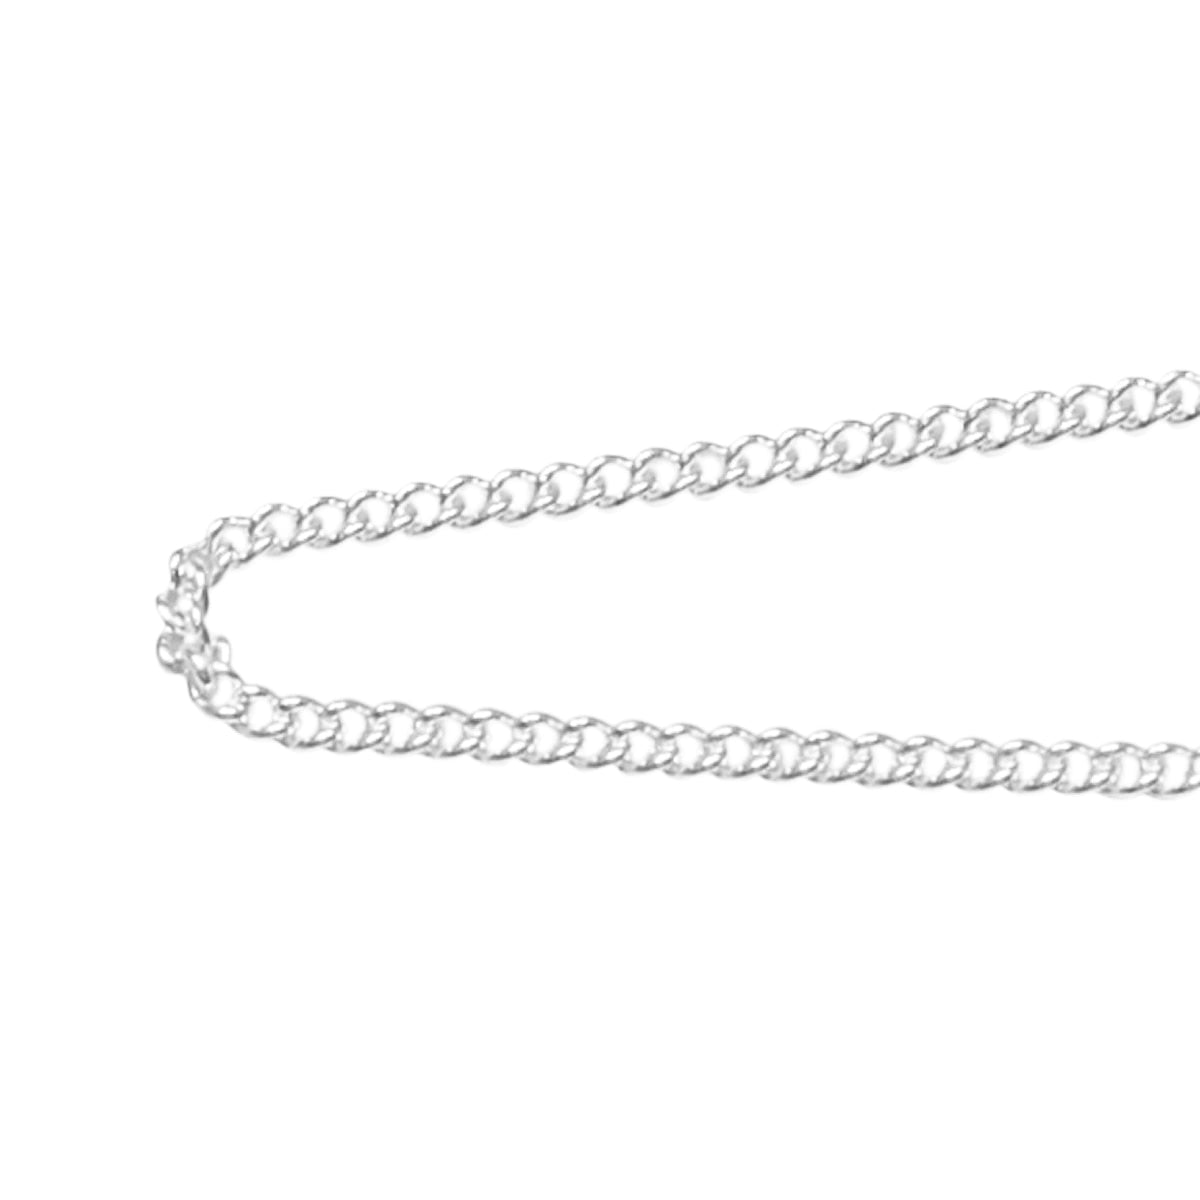 Silver Chain 925 Sterling Silver Jewelry Supplies for DIY Necklace Making,1 Meter ,ship from USA,SKU36390RSS